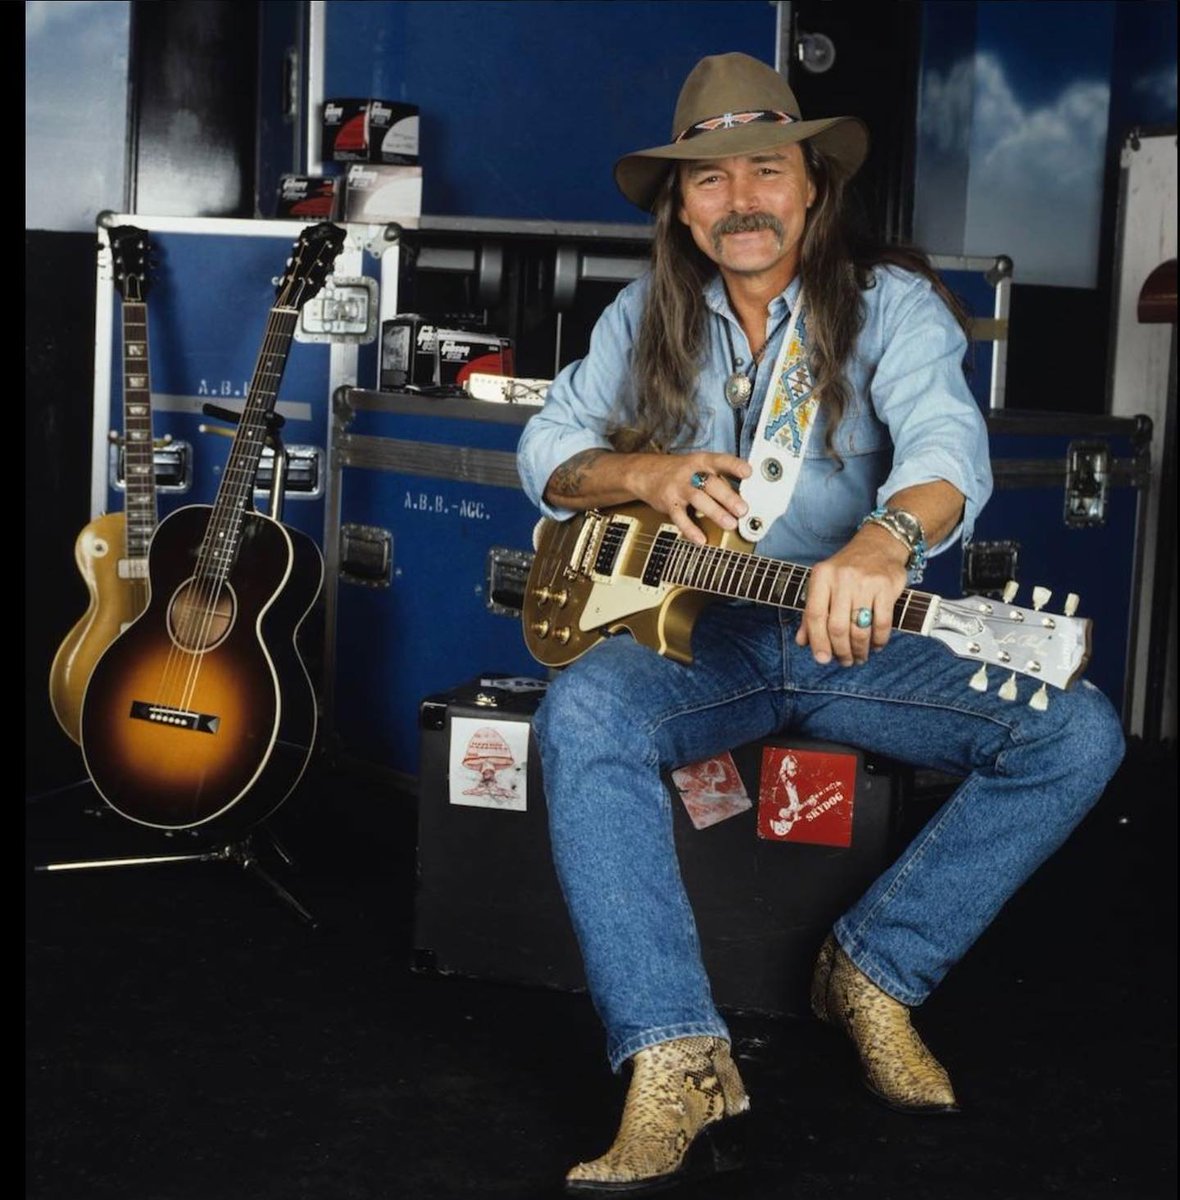 Let's all wish Dickey Betts a very happy 78th birthday today. Born December 12, 1943 in West Palm Beach, FL. #livinglegend.